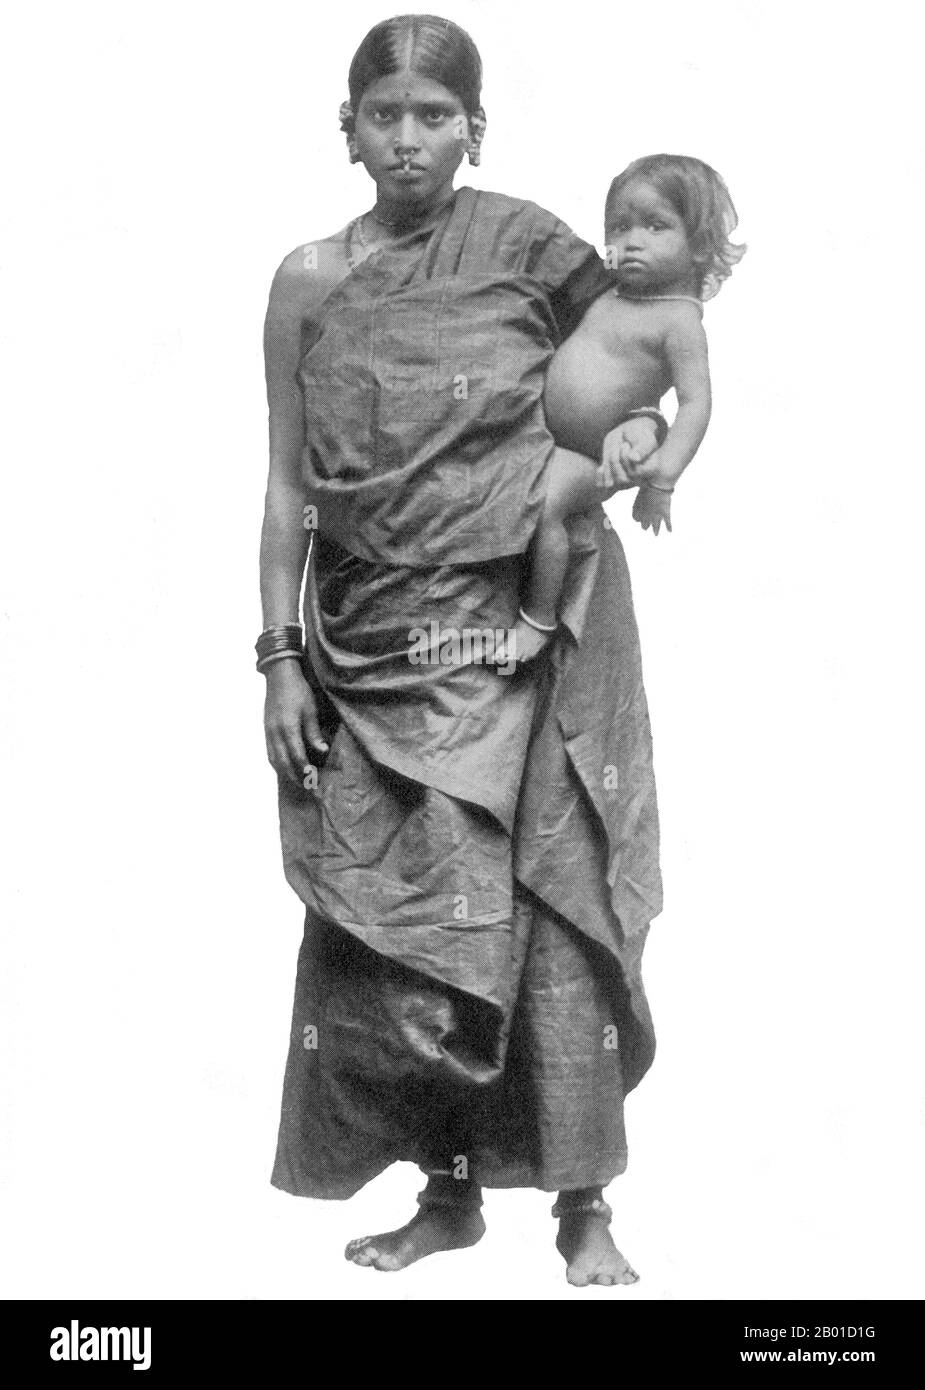 Sri Lanka: Sinhalese mother and child, late 19th century.  The Sinhalese are an Indo-Aryan ethnic group, forming the majority in Sri Lanka. They constitute 74% of the Sri Lankan population,  numbering approximately 15 million. They live mainly in central, south and west Sri Lanka. According to legend they are the descendants of the exiled Prince Vijaya who arrived from North-East India to Sri Lanka in 543 BCE.  The Sinhalese identity is based on language, heritage and religion. The vast majority of Sinhalese are Theravada Buddhists and speak Sinhala, an Indo-Aryan language. Stock Photo